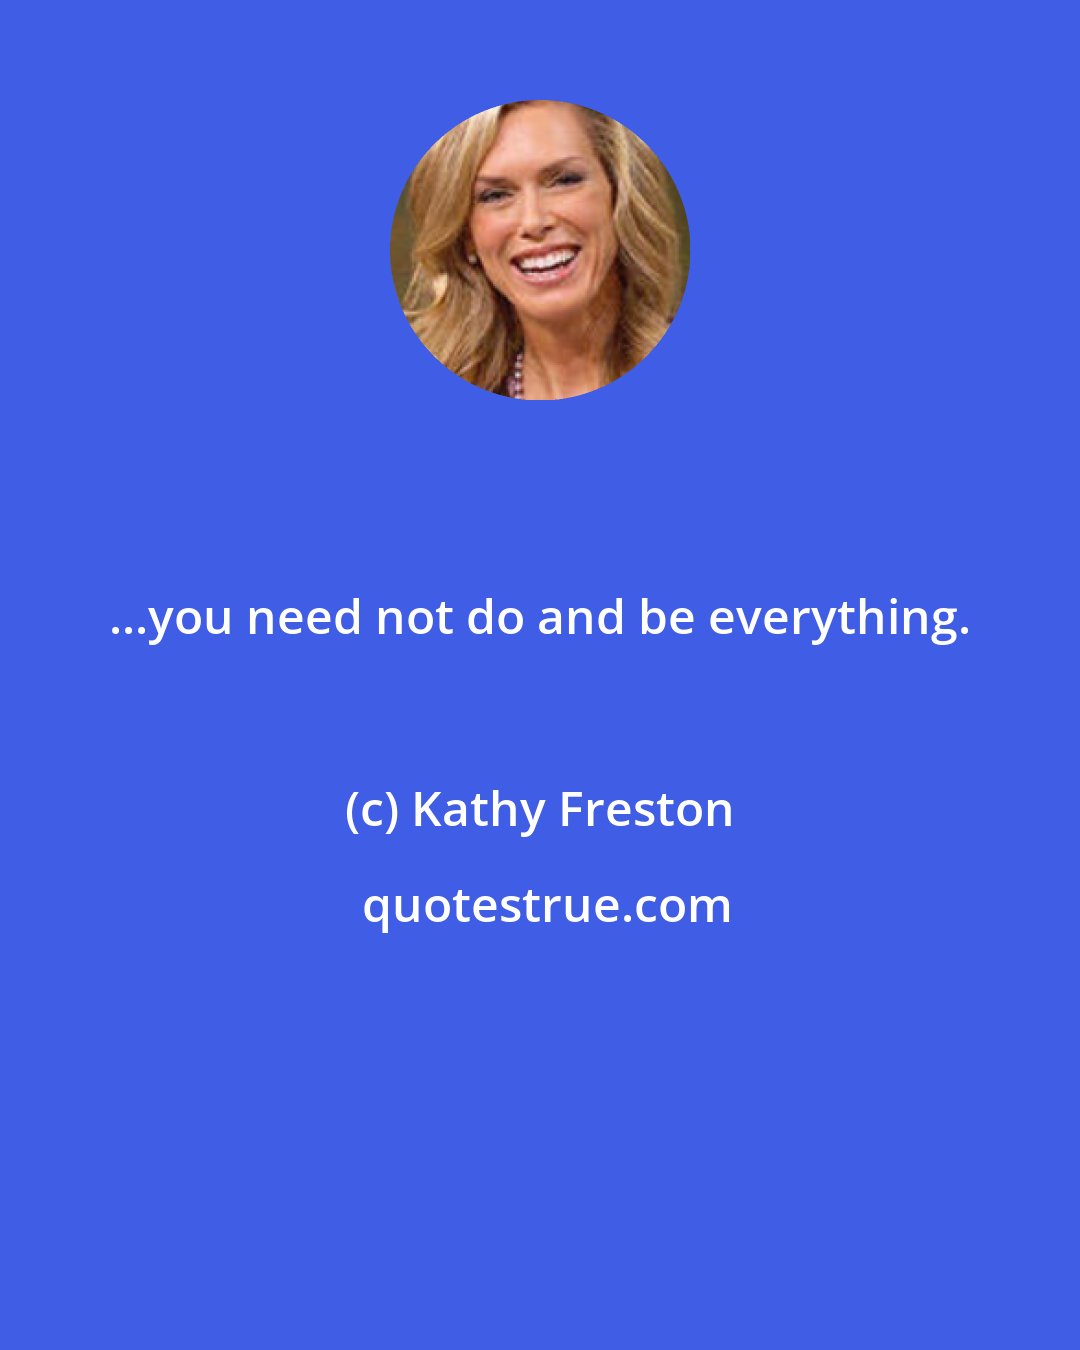 Kathy Freston: ...you need not do and be everything.